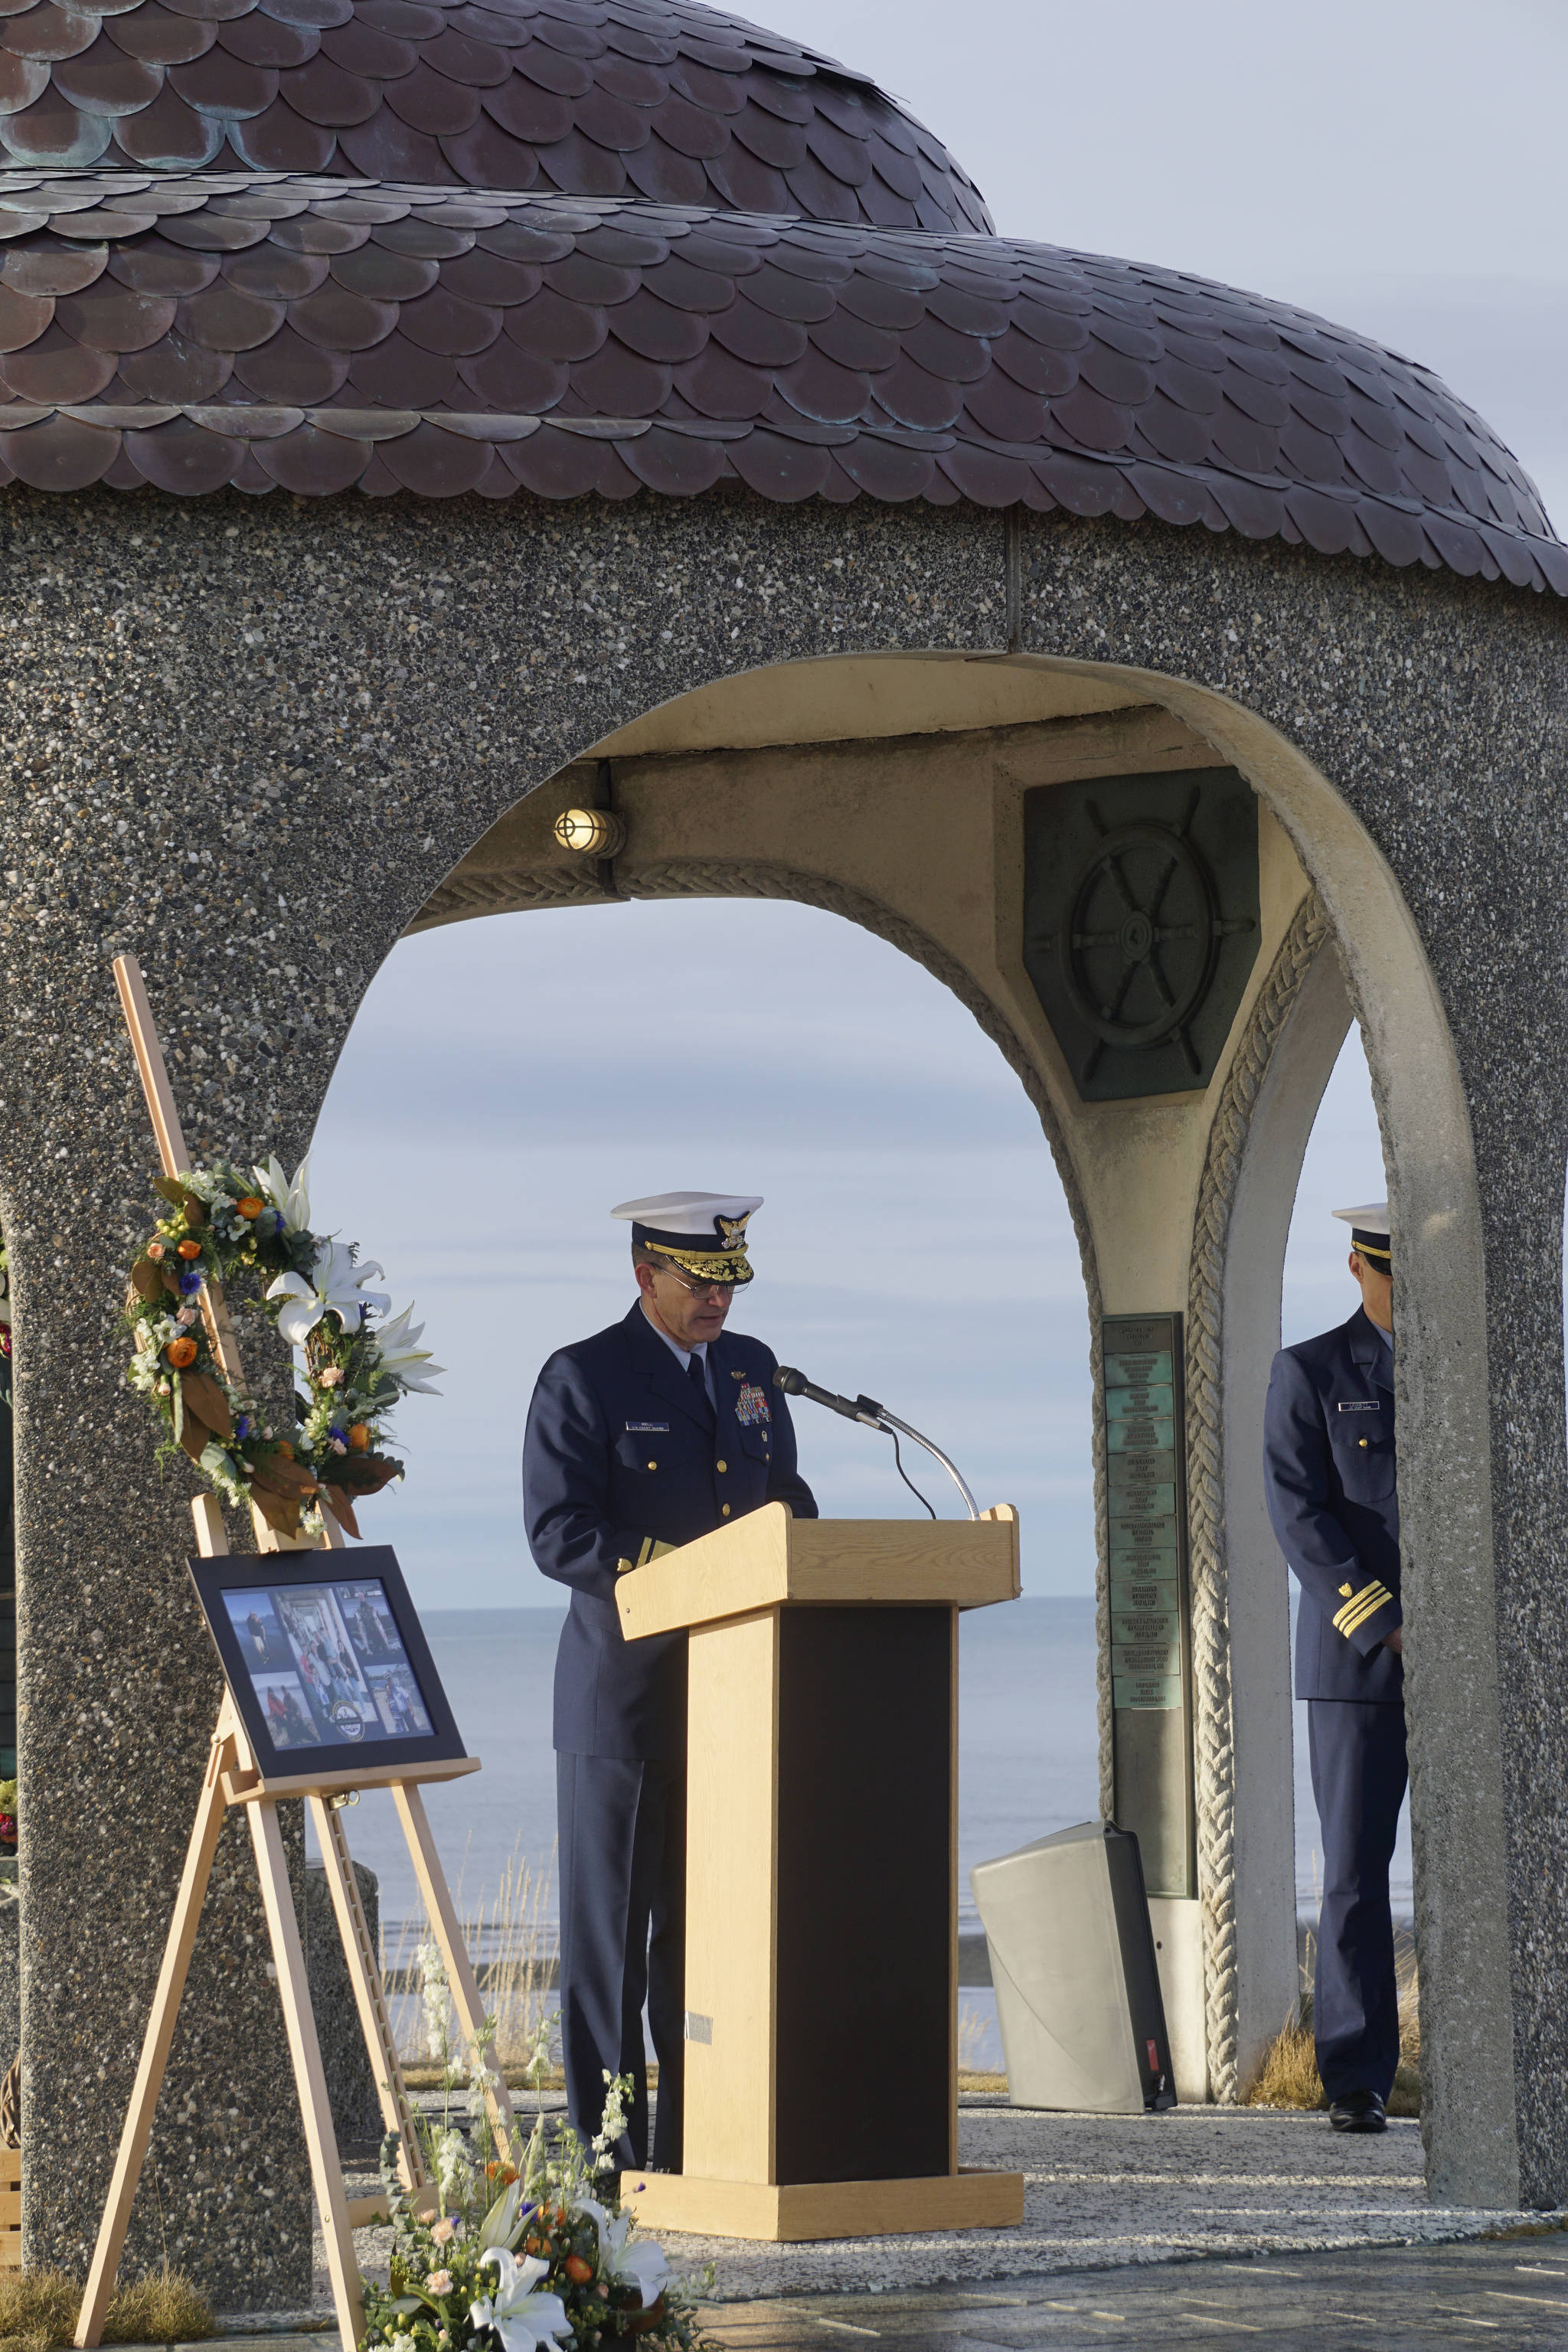 Adm. Matthew T. Bell Jr., 17th District Commander, U.S. Coast Guard, speaks at a memorial service for Chief Warrant Officer Michael Kozloski on Friday morning, Feb. 8, 2019, at the Seafarer’s Memorial on the Homer Spit, Homer, Alaska. (Photo by Michael Armstrong/Homer News)